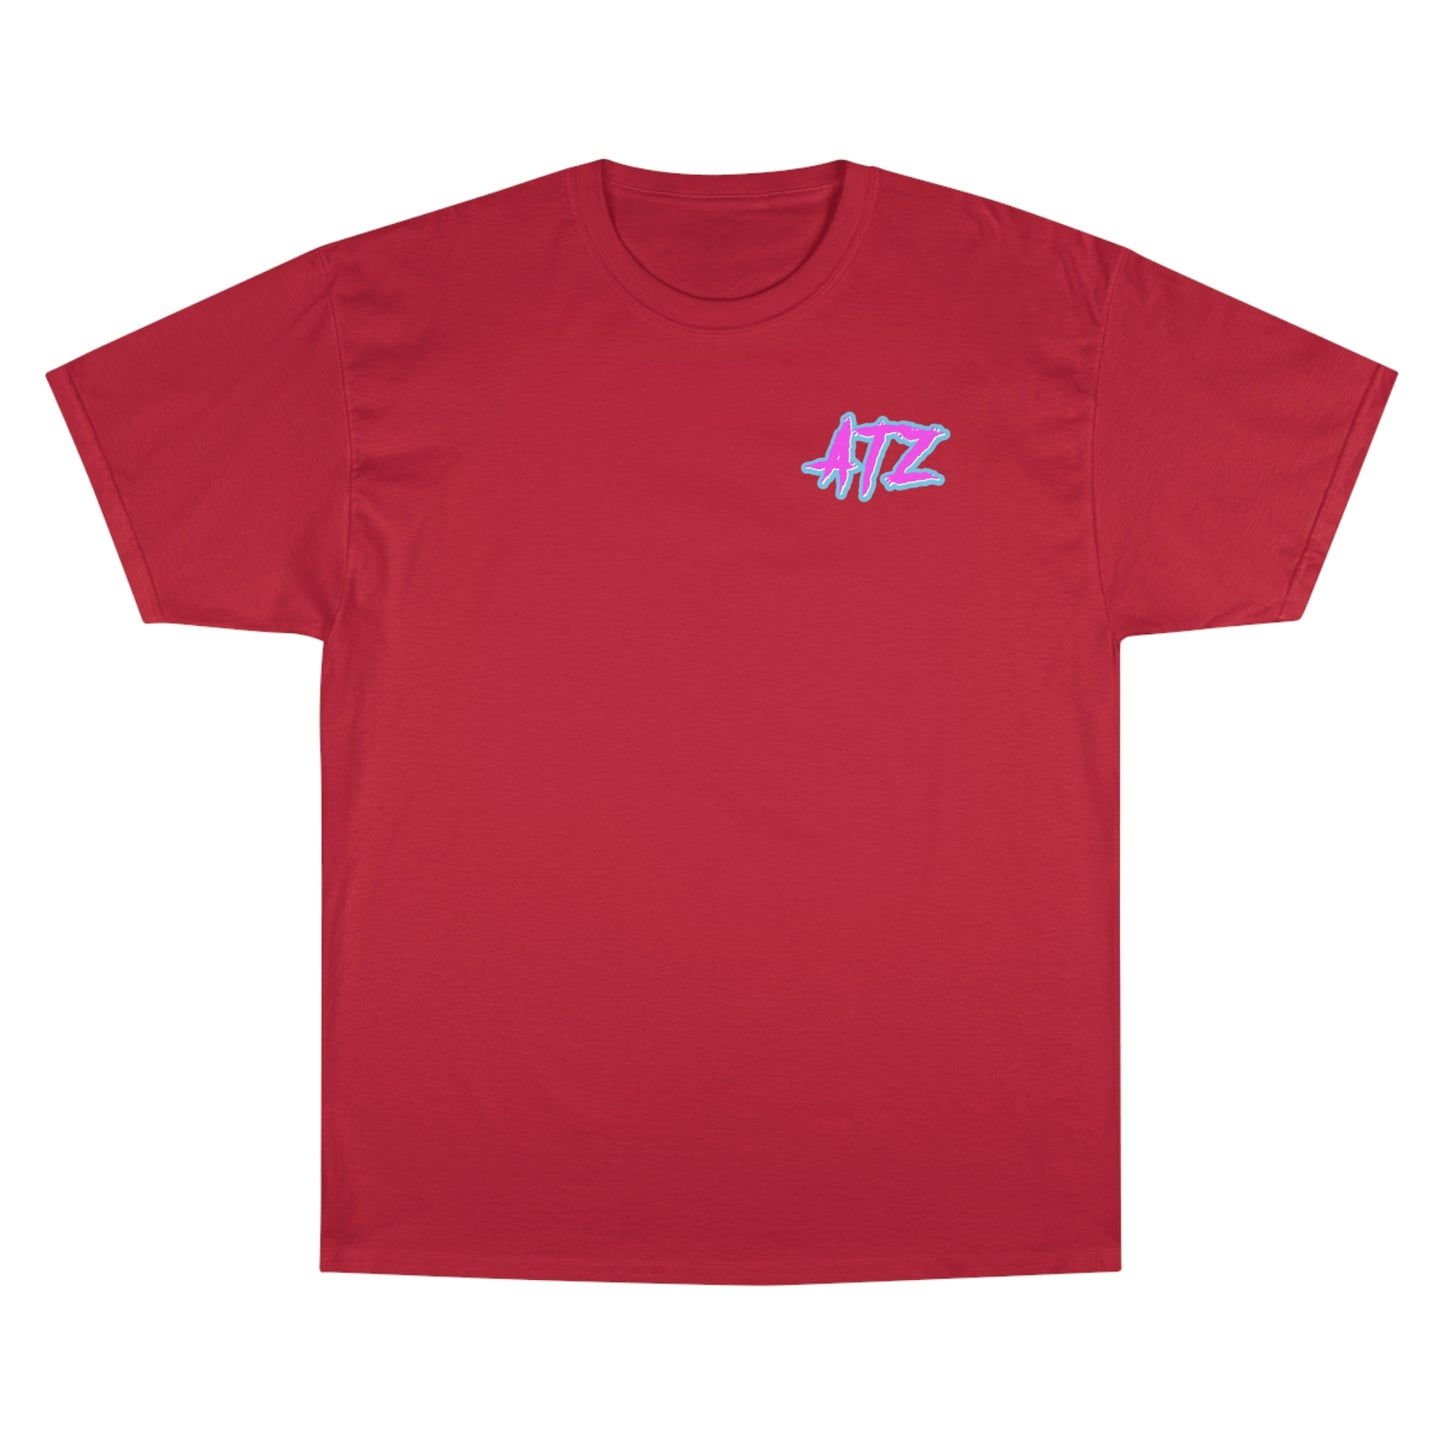 Atziluth Gallery "Tag Logo" Champion T-Shirt